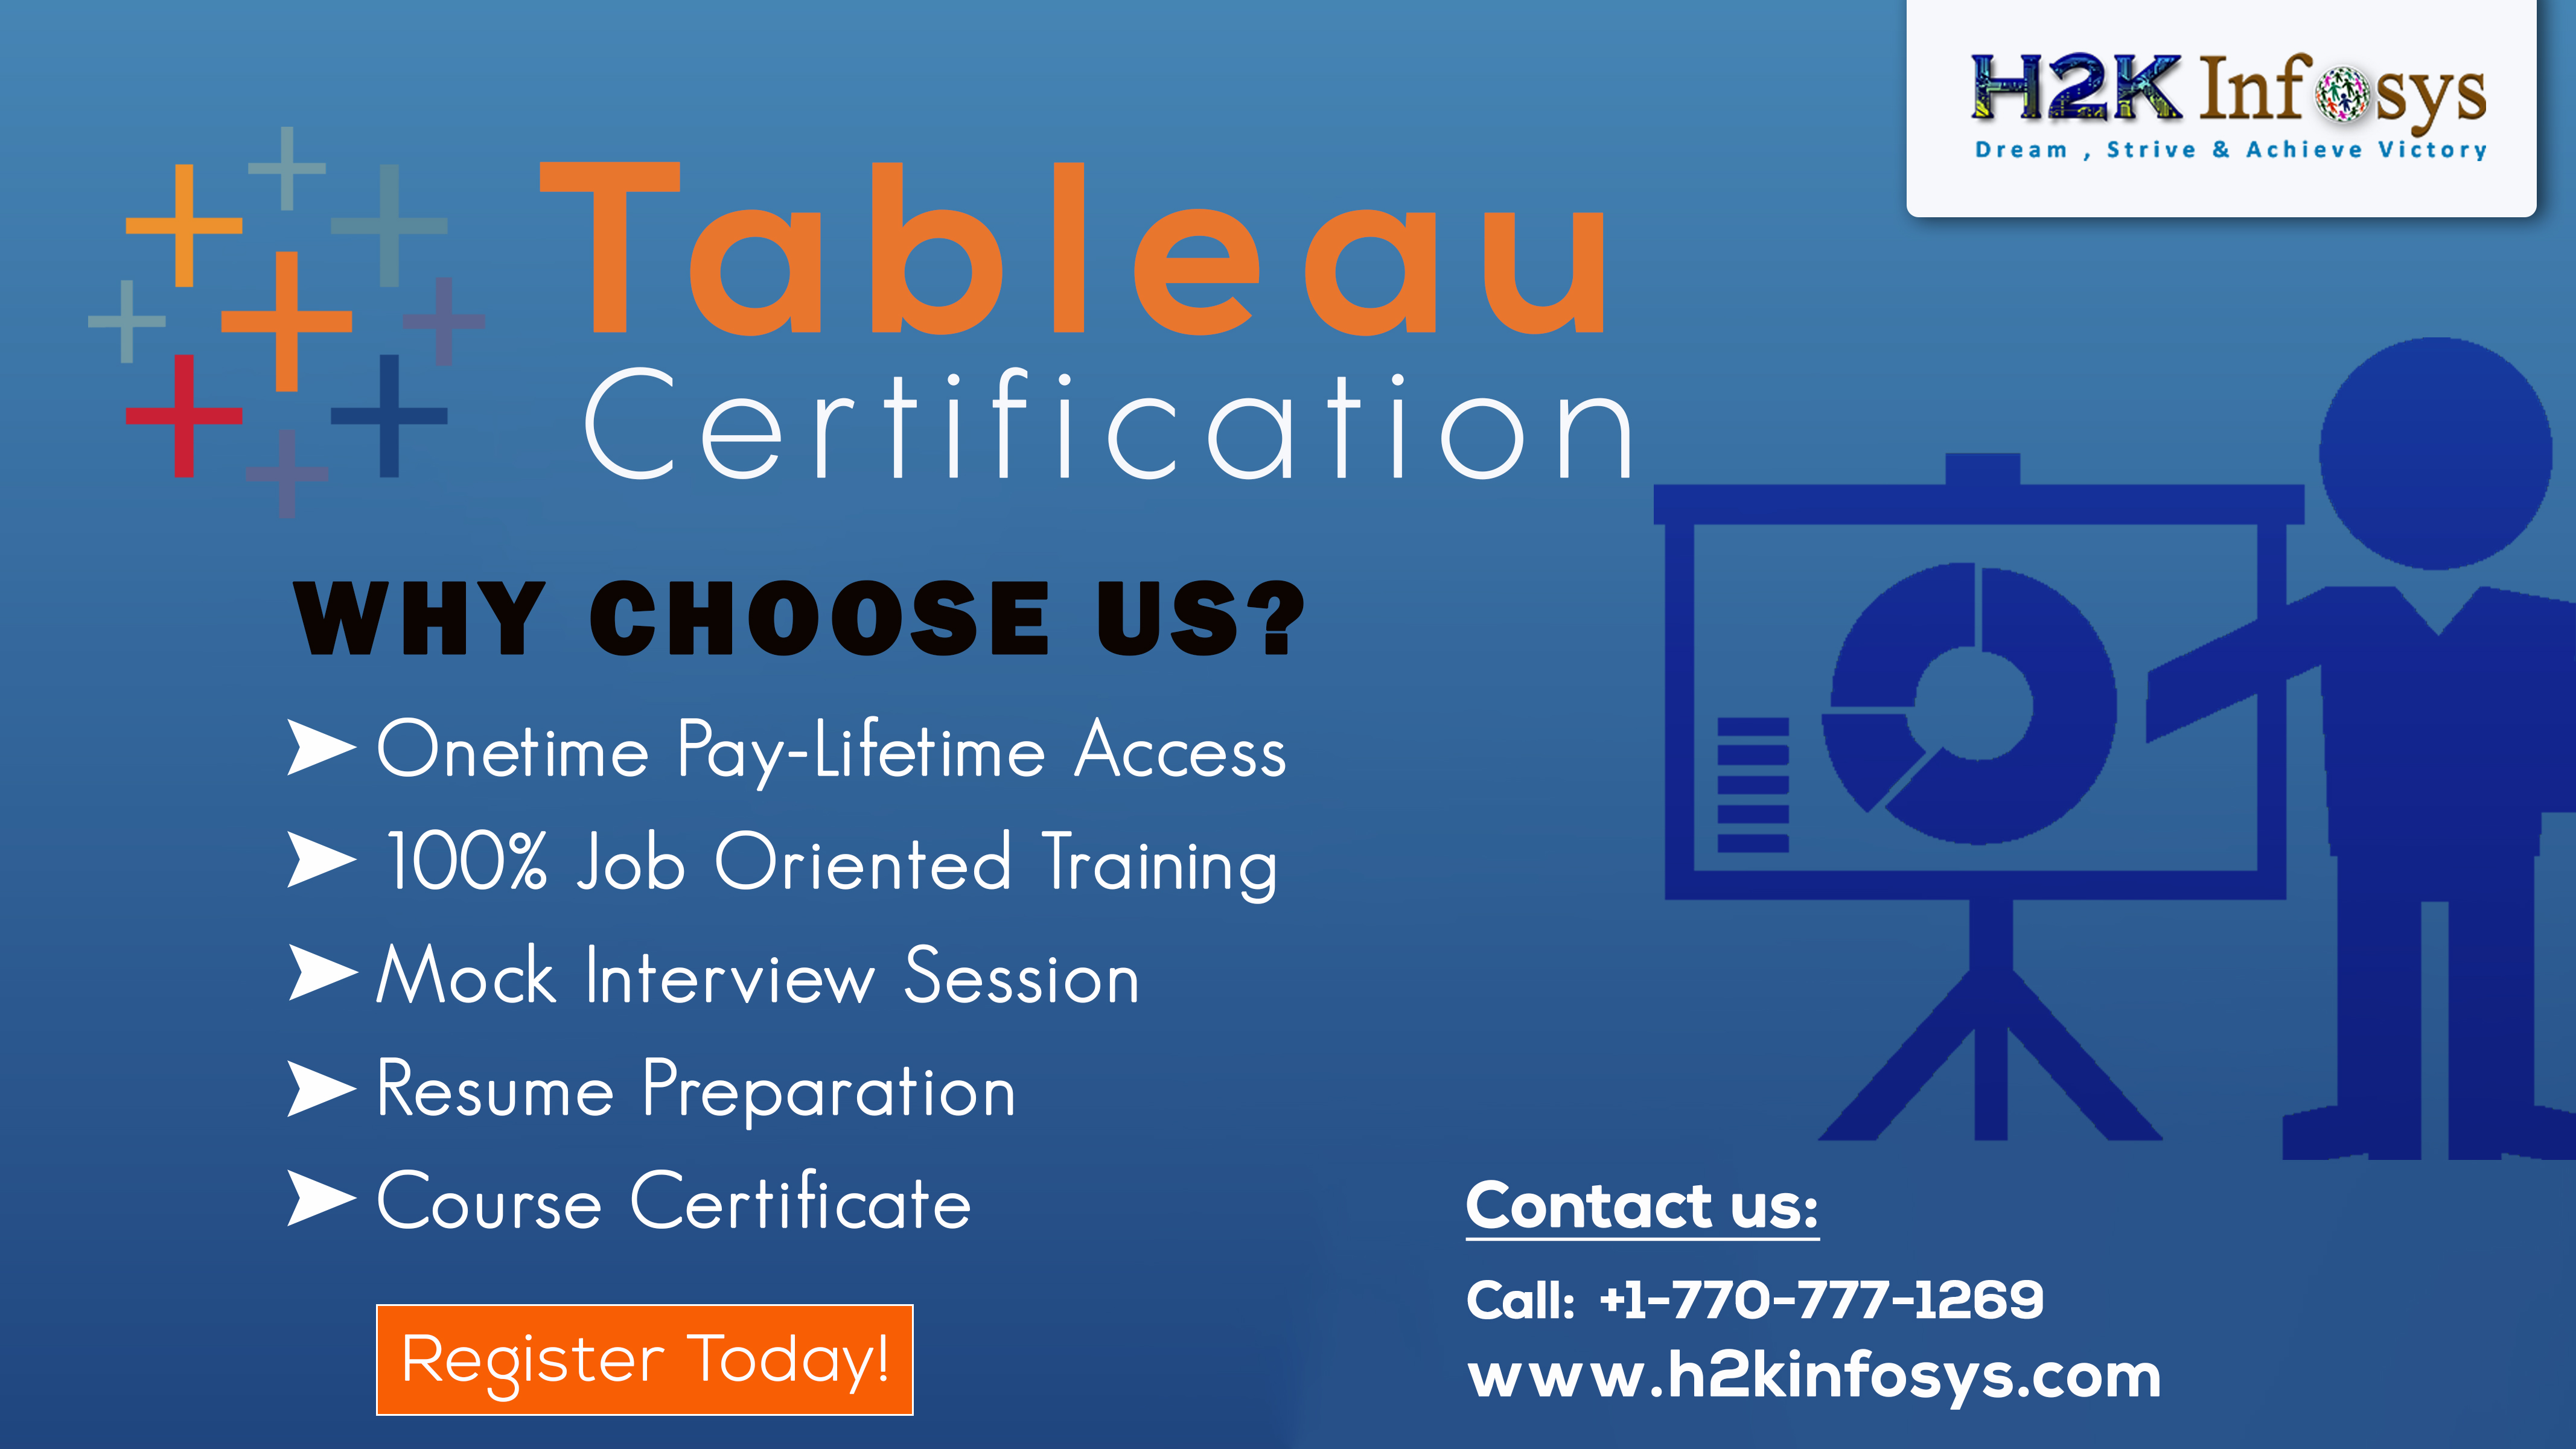 Tableau Online Training with Placement Assistance